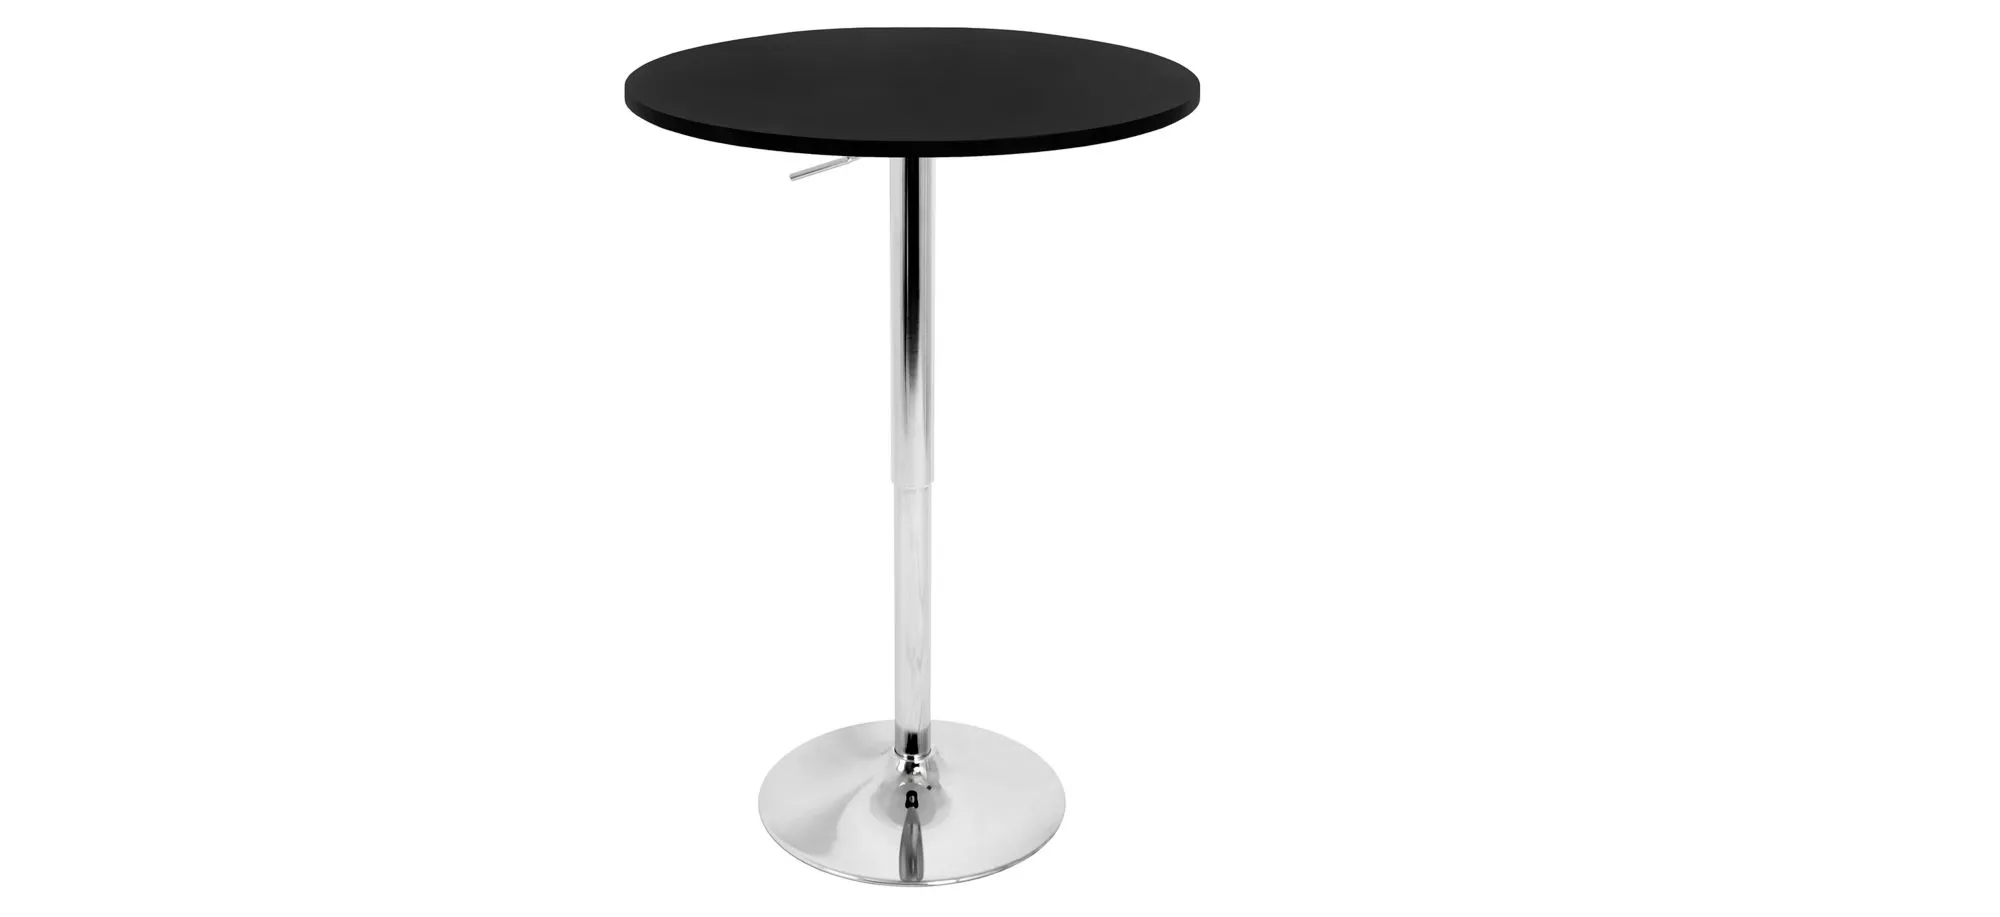 Spokane Adjustable-Height Bar Table in Black by Lumisource